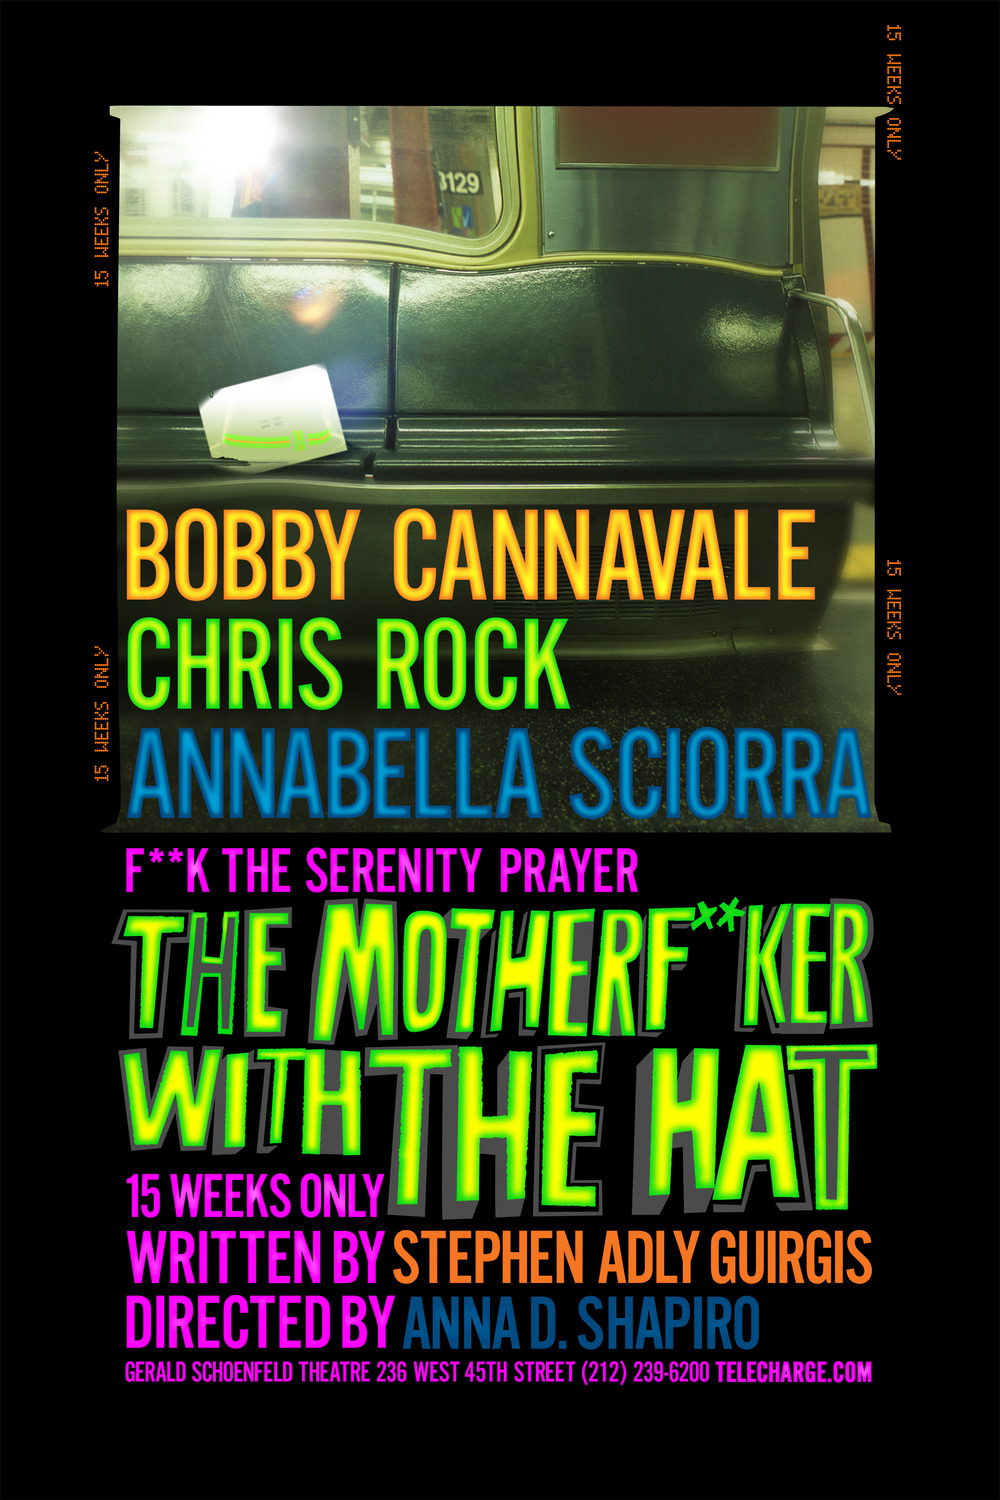 Extra Large Broadway Poster Image for The Motherfucker with the Hat 